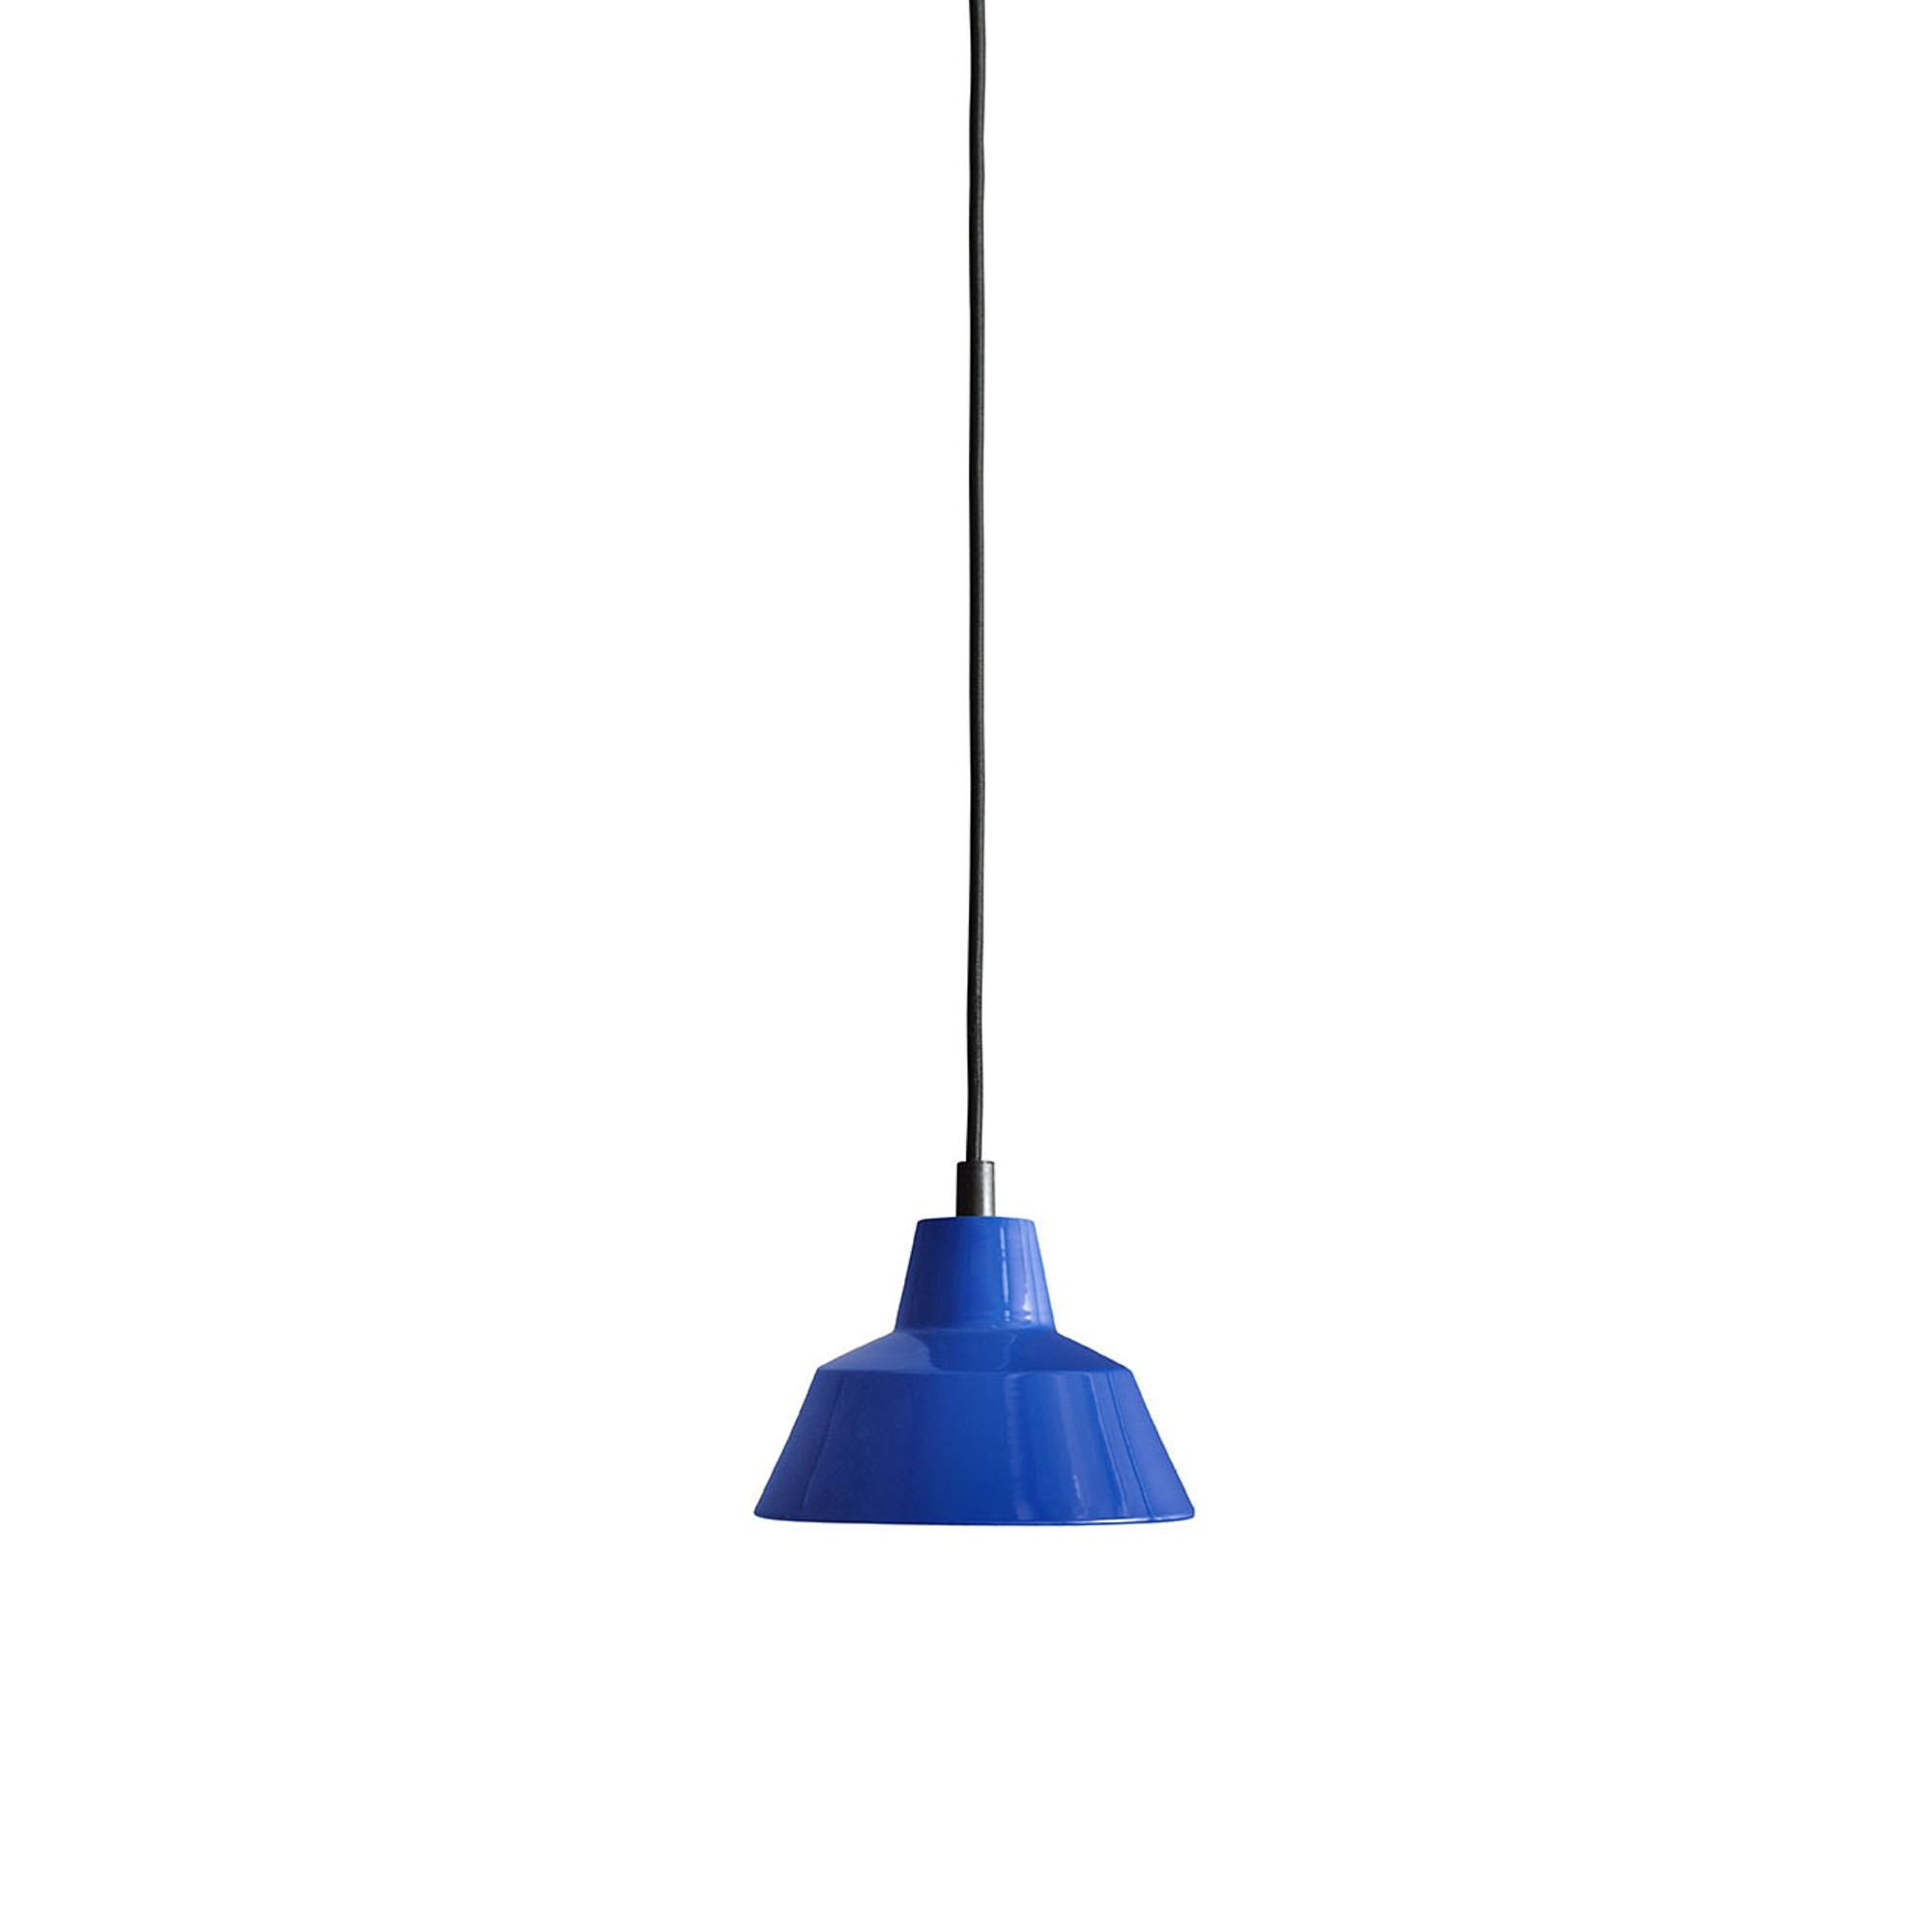 Made By Hand Workshop Lamp Pendant Blue W1